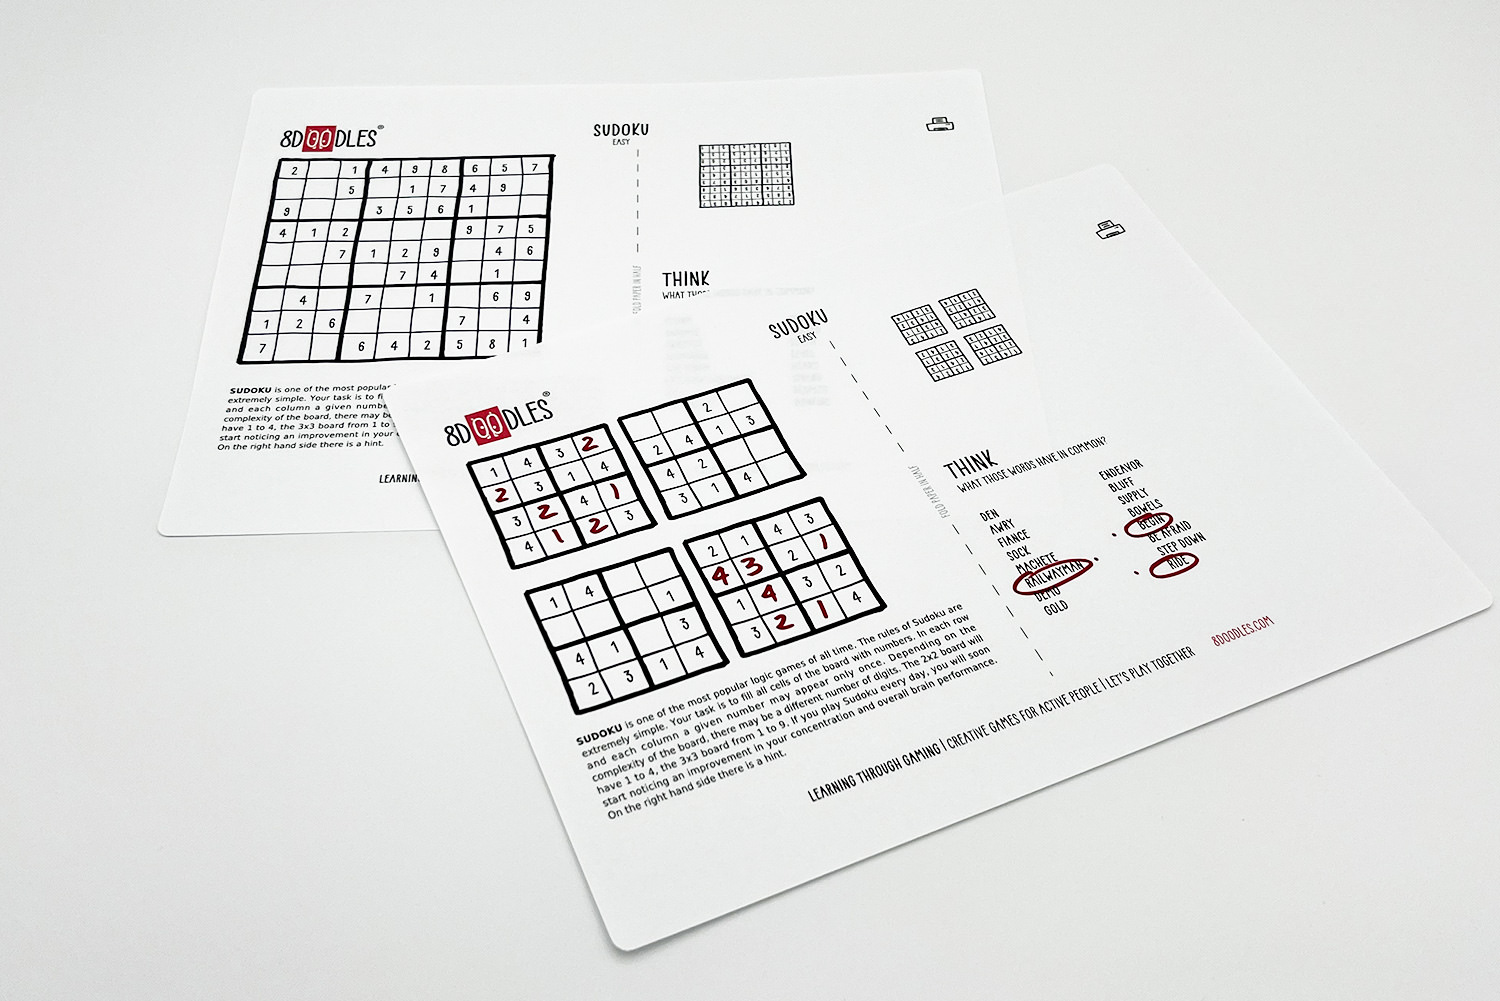 info-box-sudoku-puzzle-and-logic-game